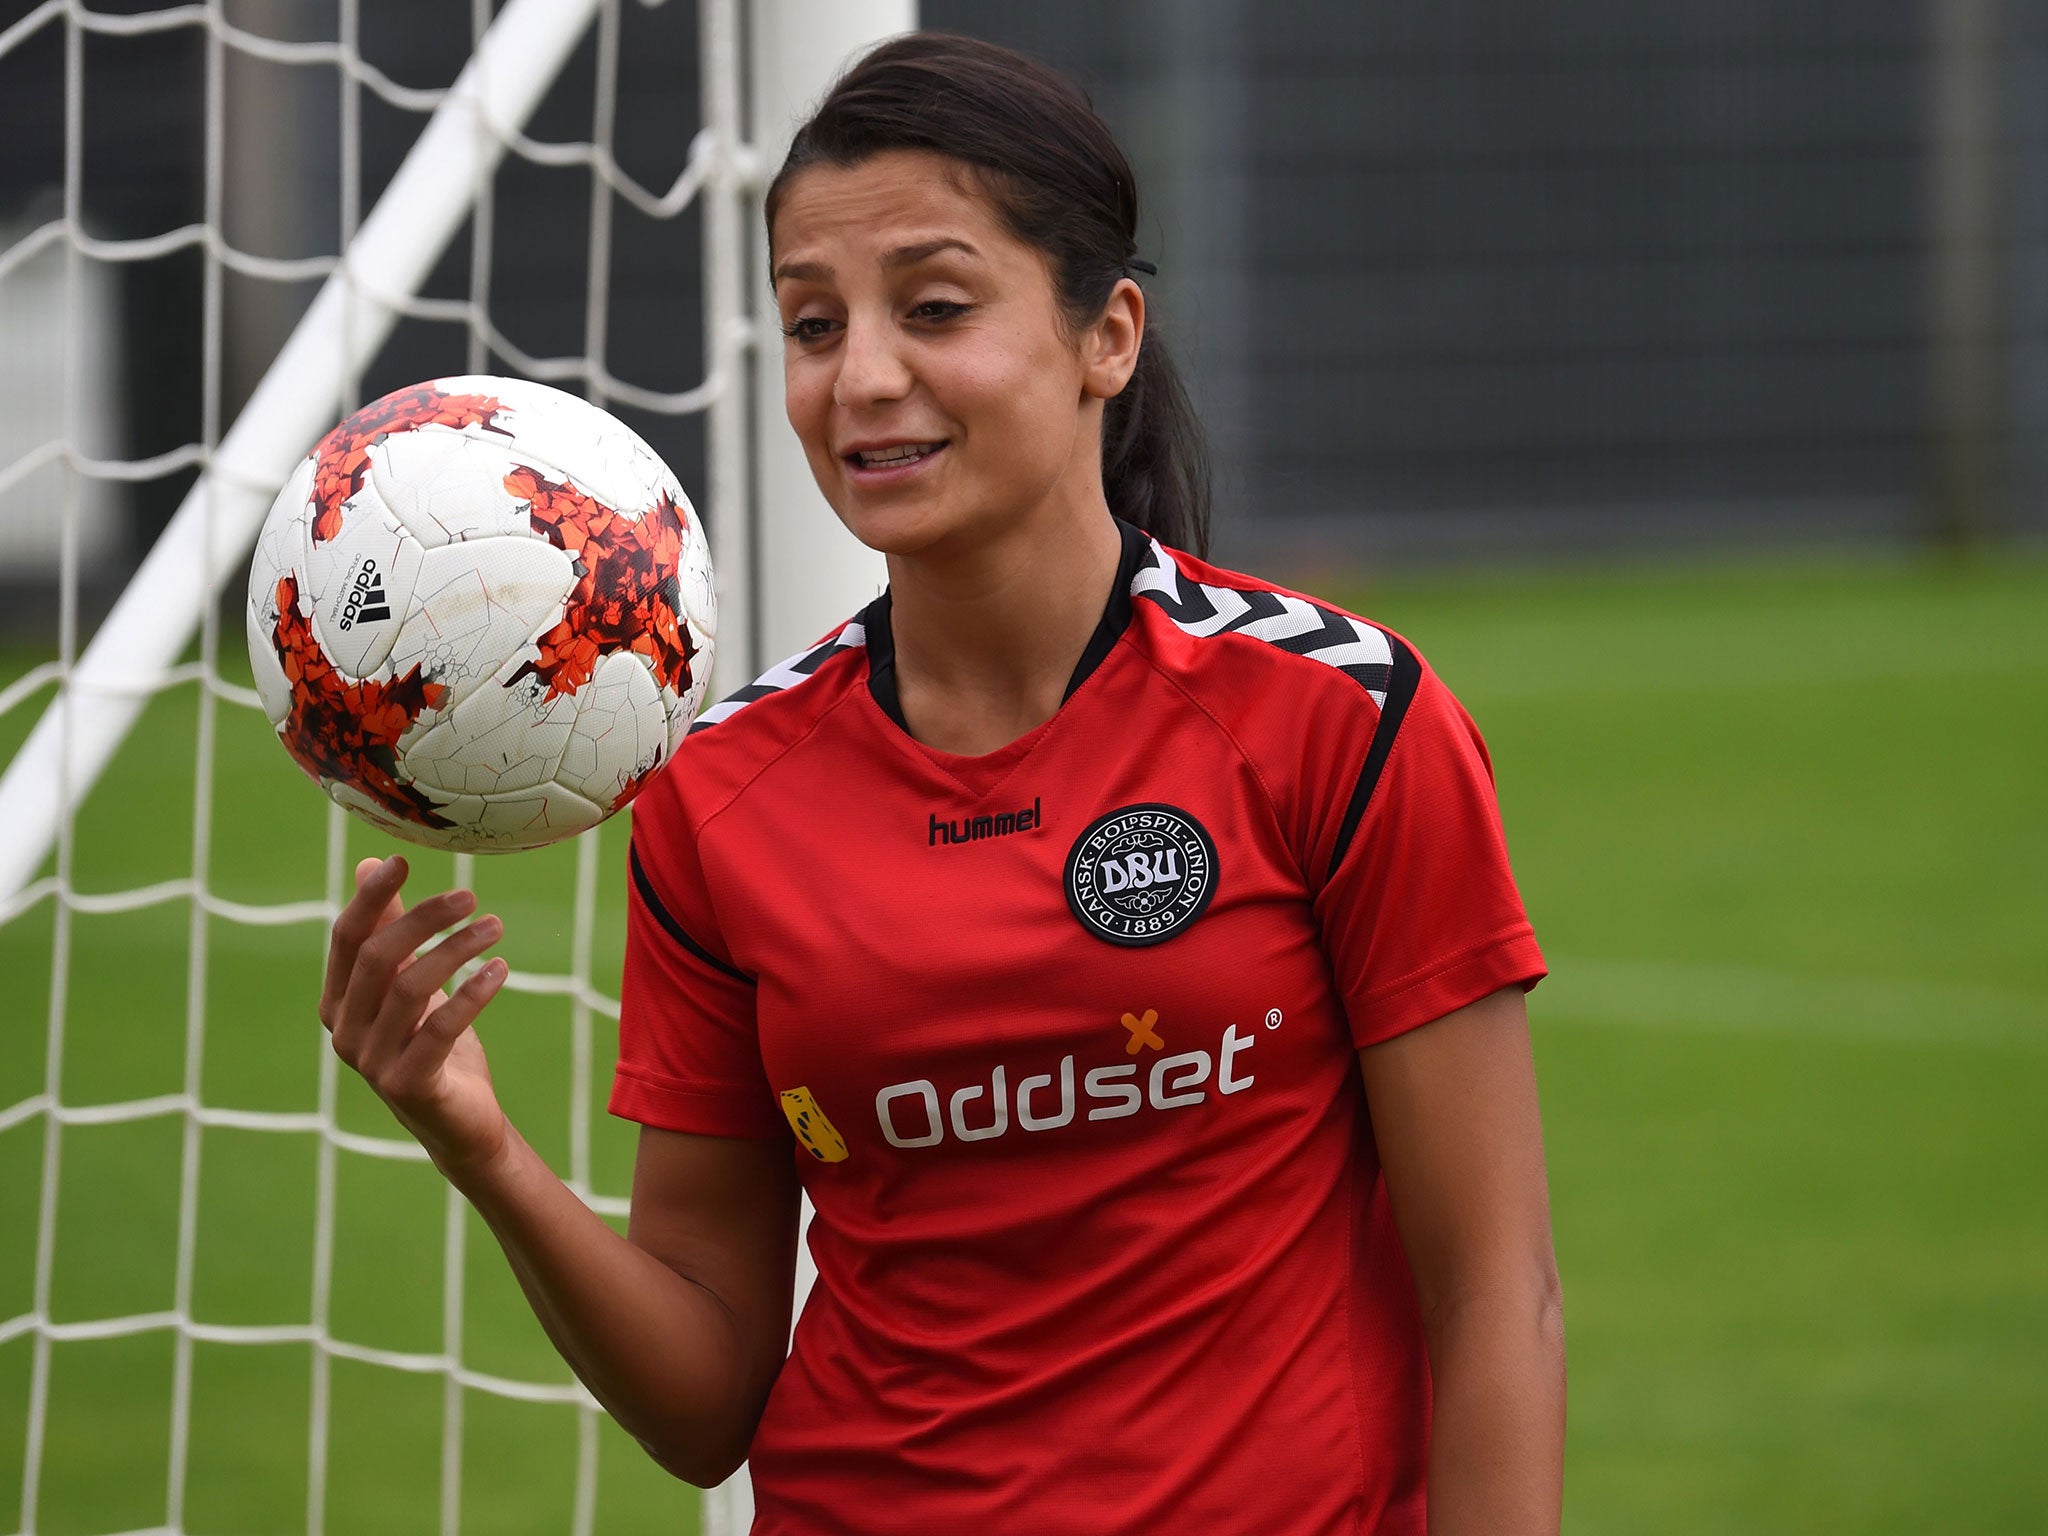 Nadim signed for Portland Thorns where she regularly plays in front of more than 15,000 fans